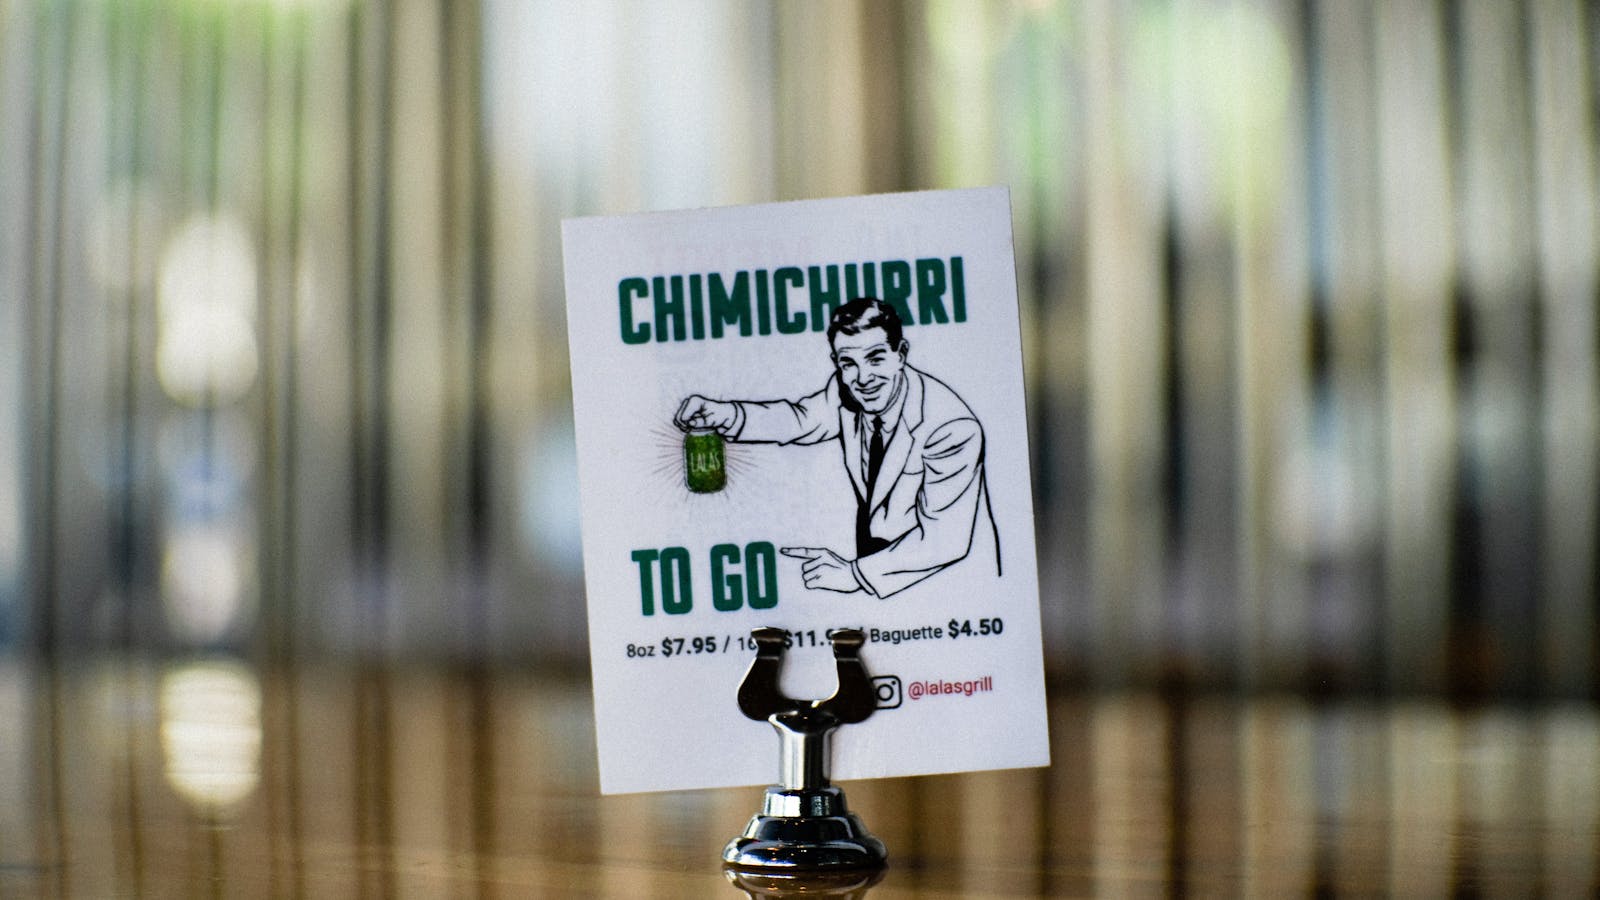 Sign for chimichurri at LALA'S Argentine Grill in L.A.